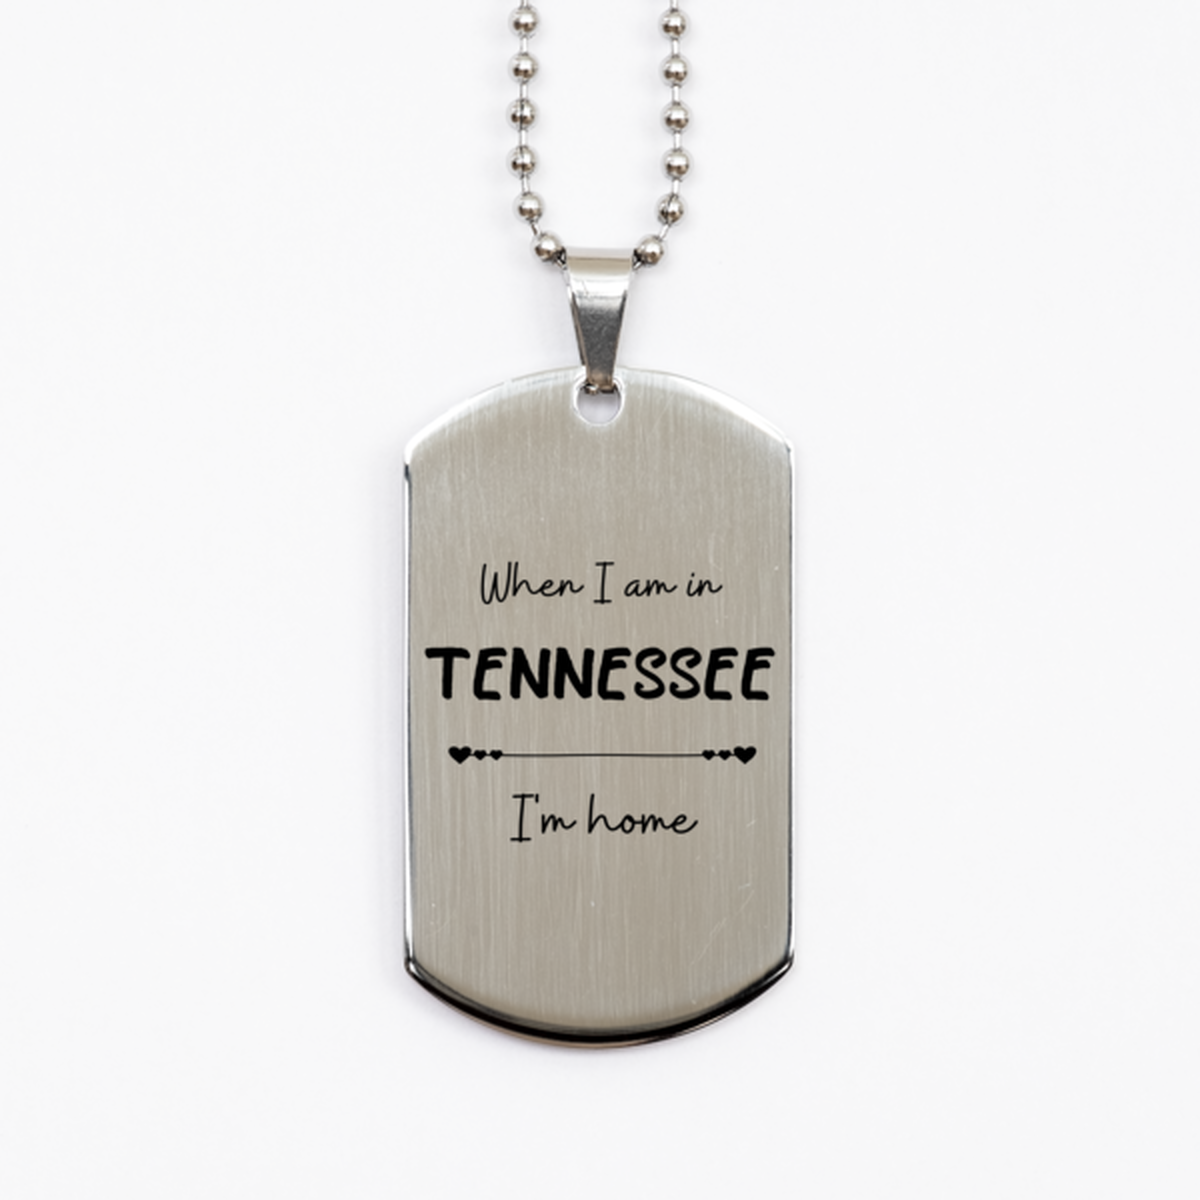 When I am in Tennessee I'm home Silver Dog Tag, Cheap Gifts For Tennessee, State Tennessee Birthday Gifts for Friends Coworker